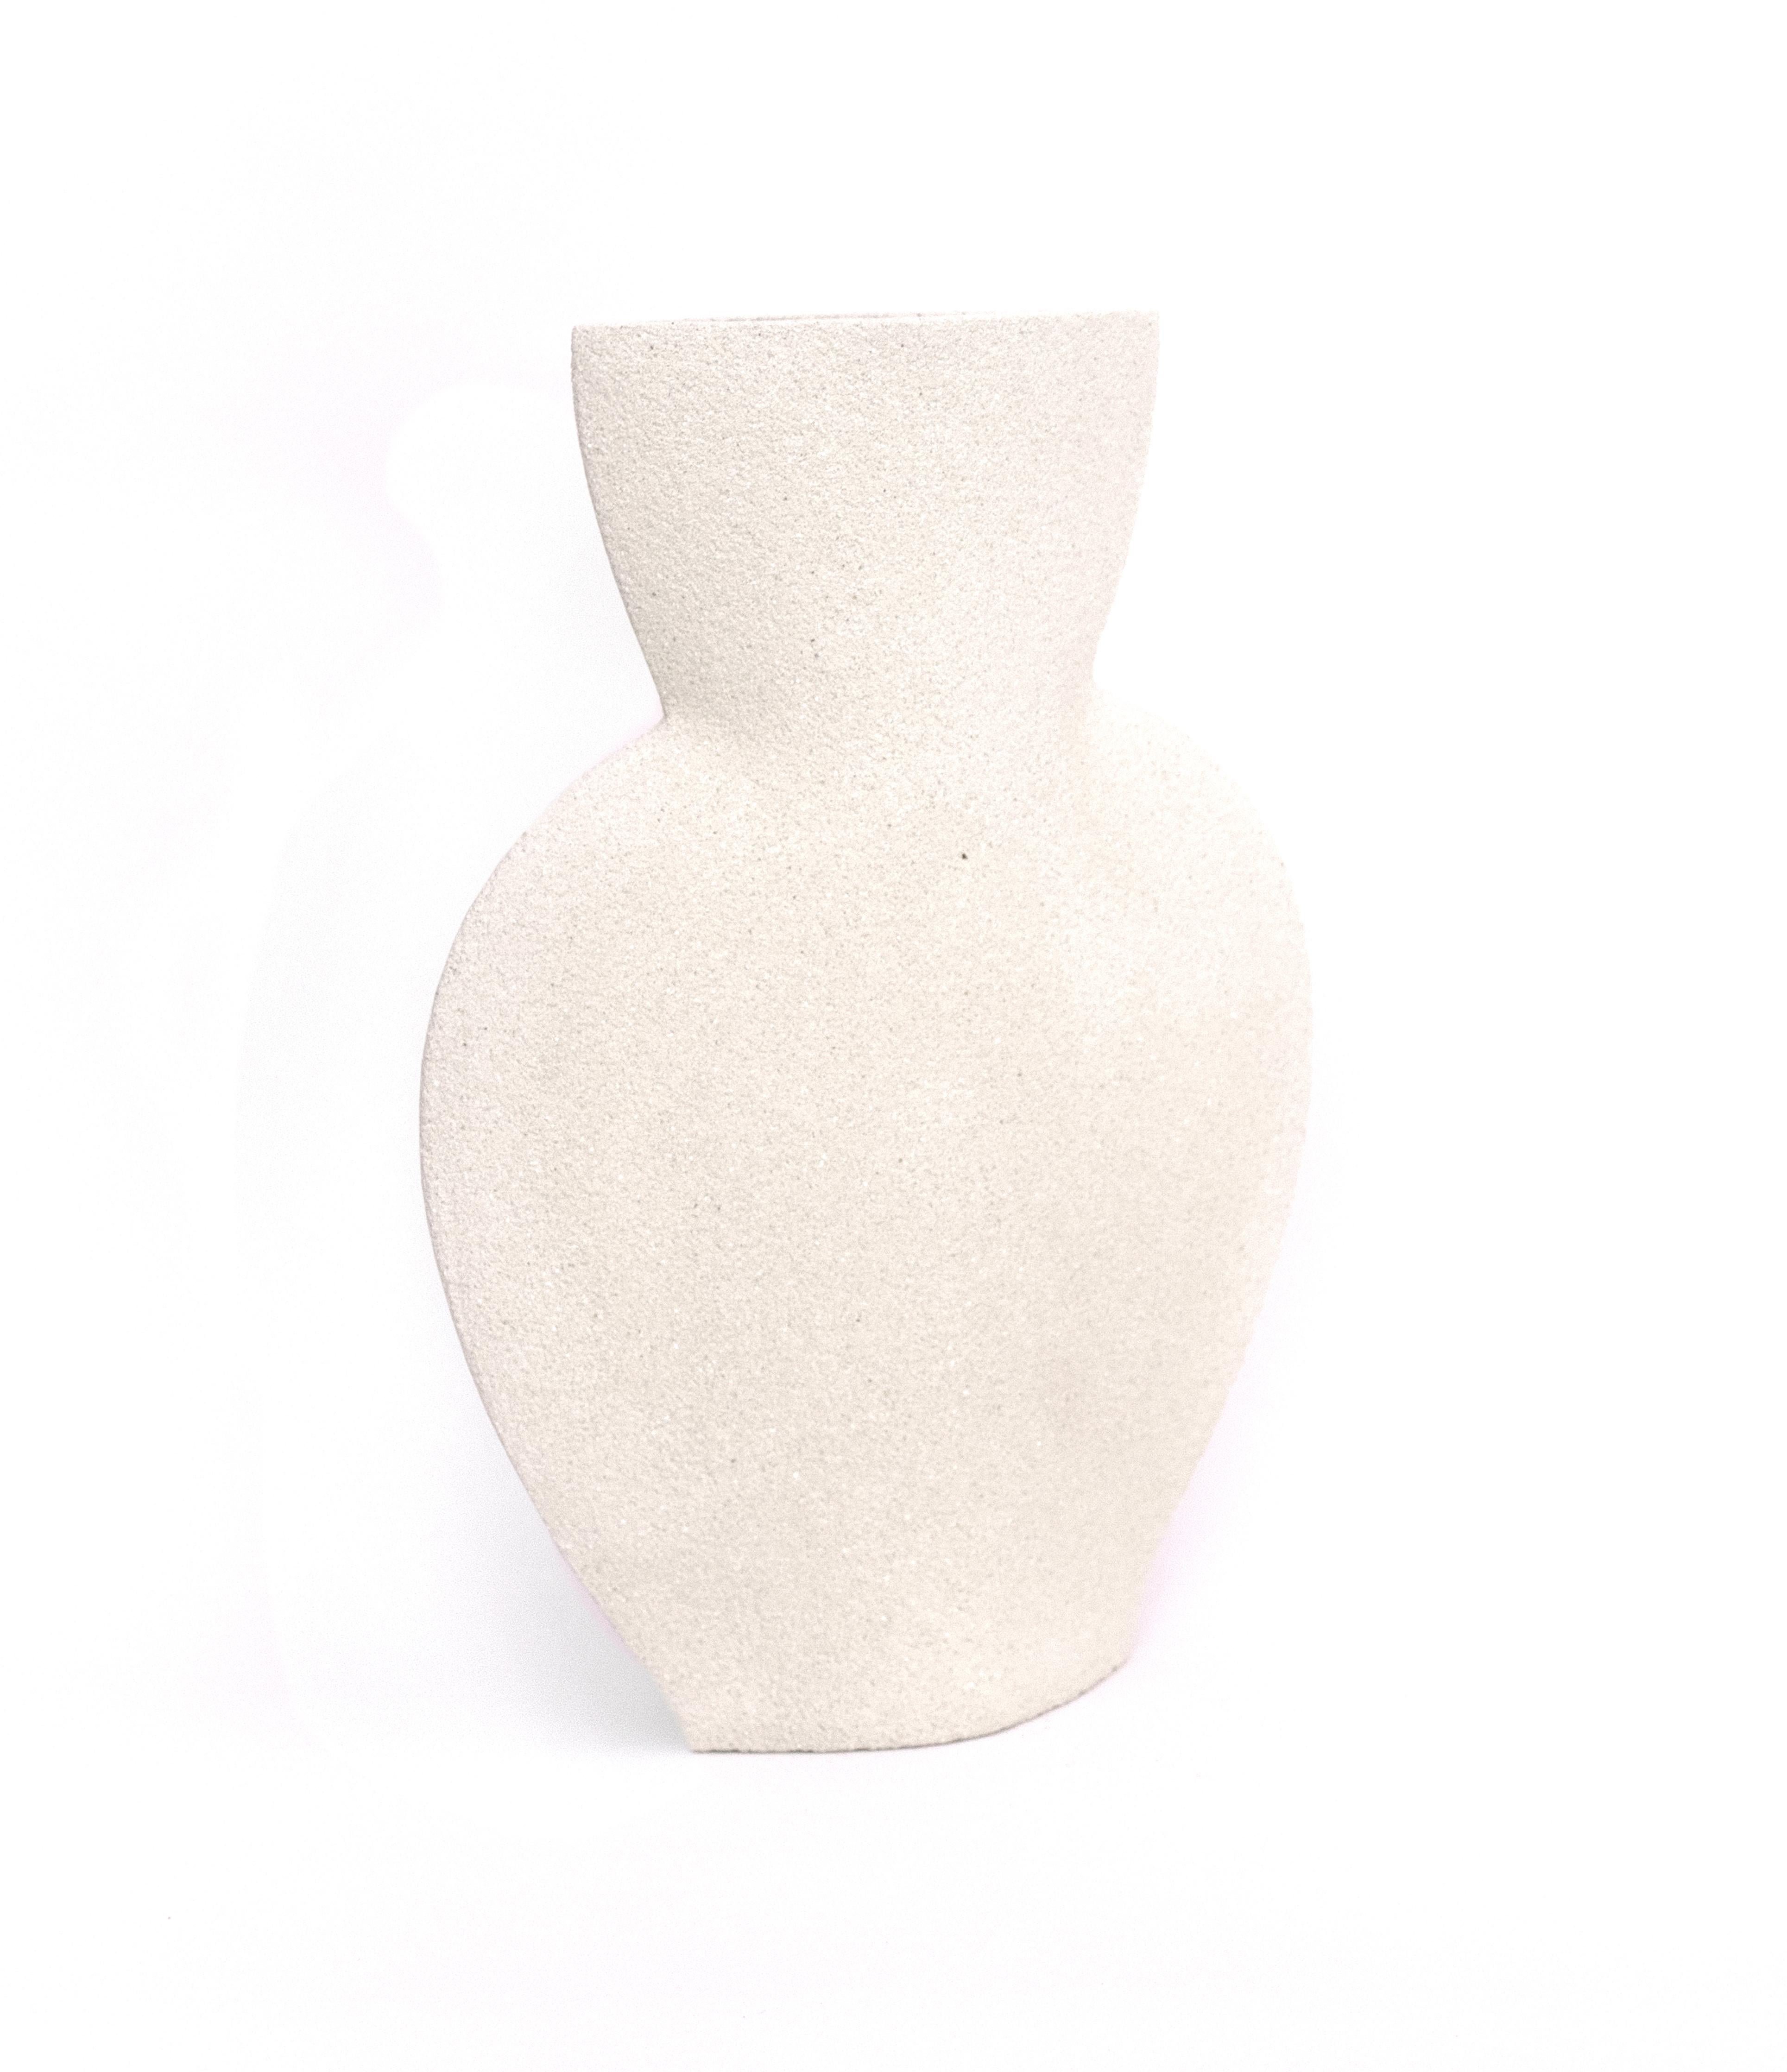 Amphora - white

Measures: 
H: 25 cm / L: 19 cm
H: 10 inch. / L: 7.5 inch.

- Stoneware fired at high temperature finished with transparent glossy glaze inside.
- Raw exterior showcasing the natural aspect of the clay’s texture.
- Hand-made